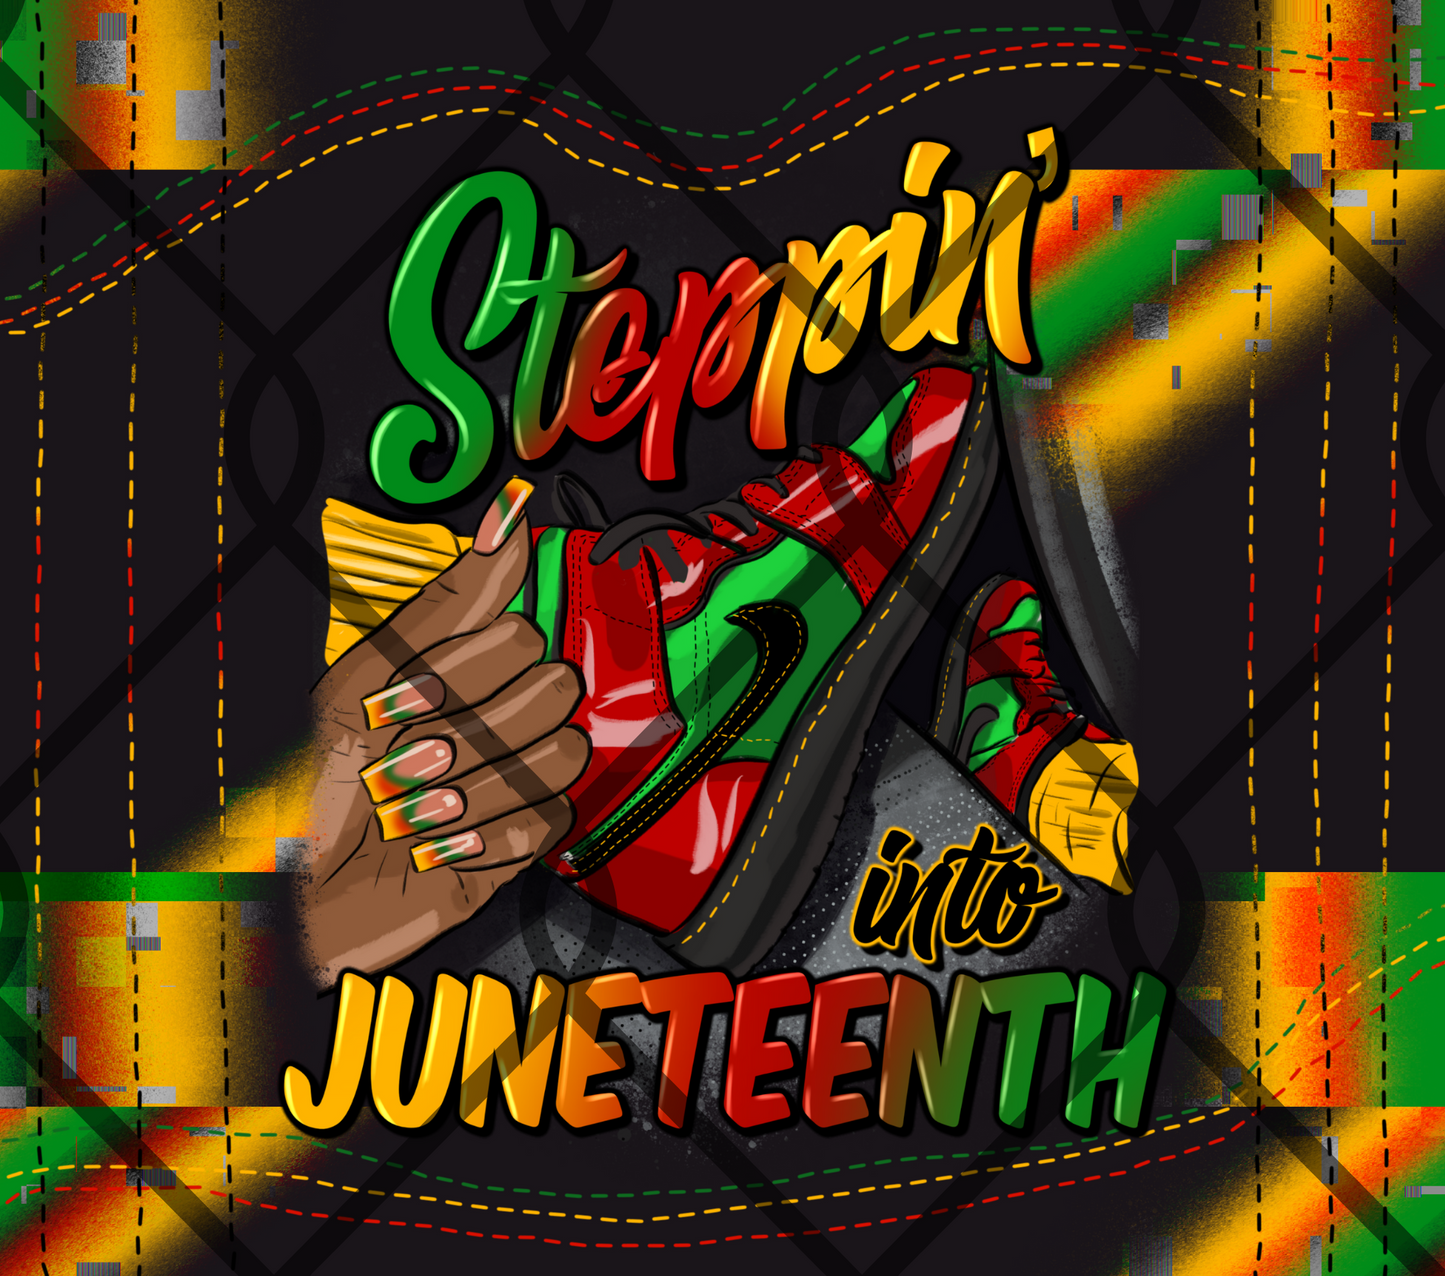 Stepping into Juneteenth